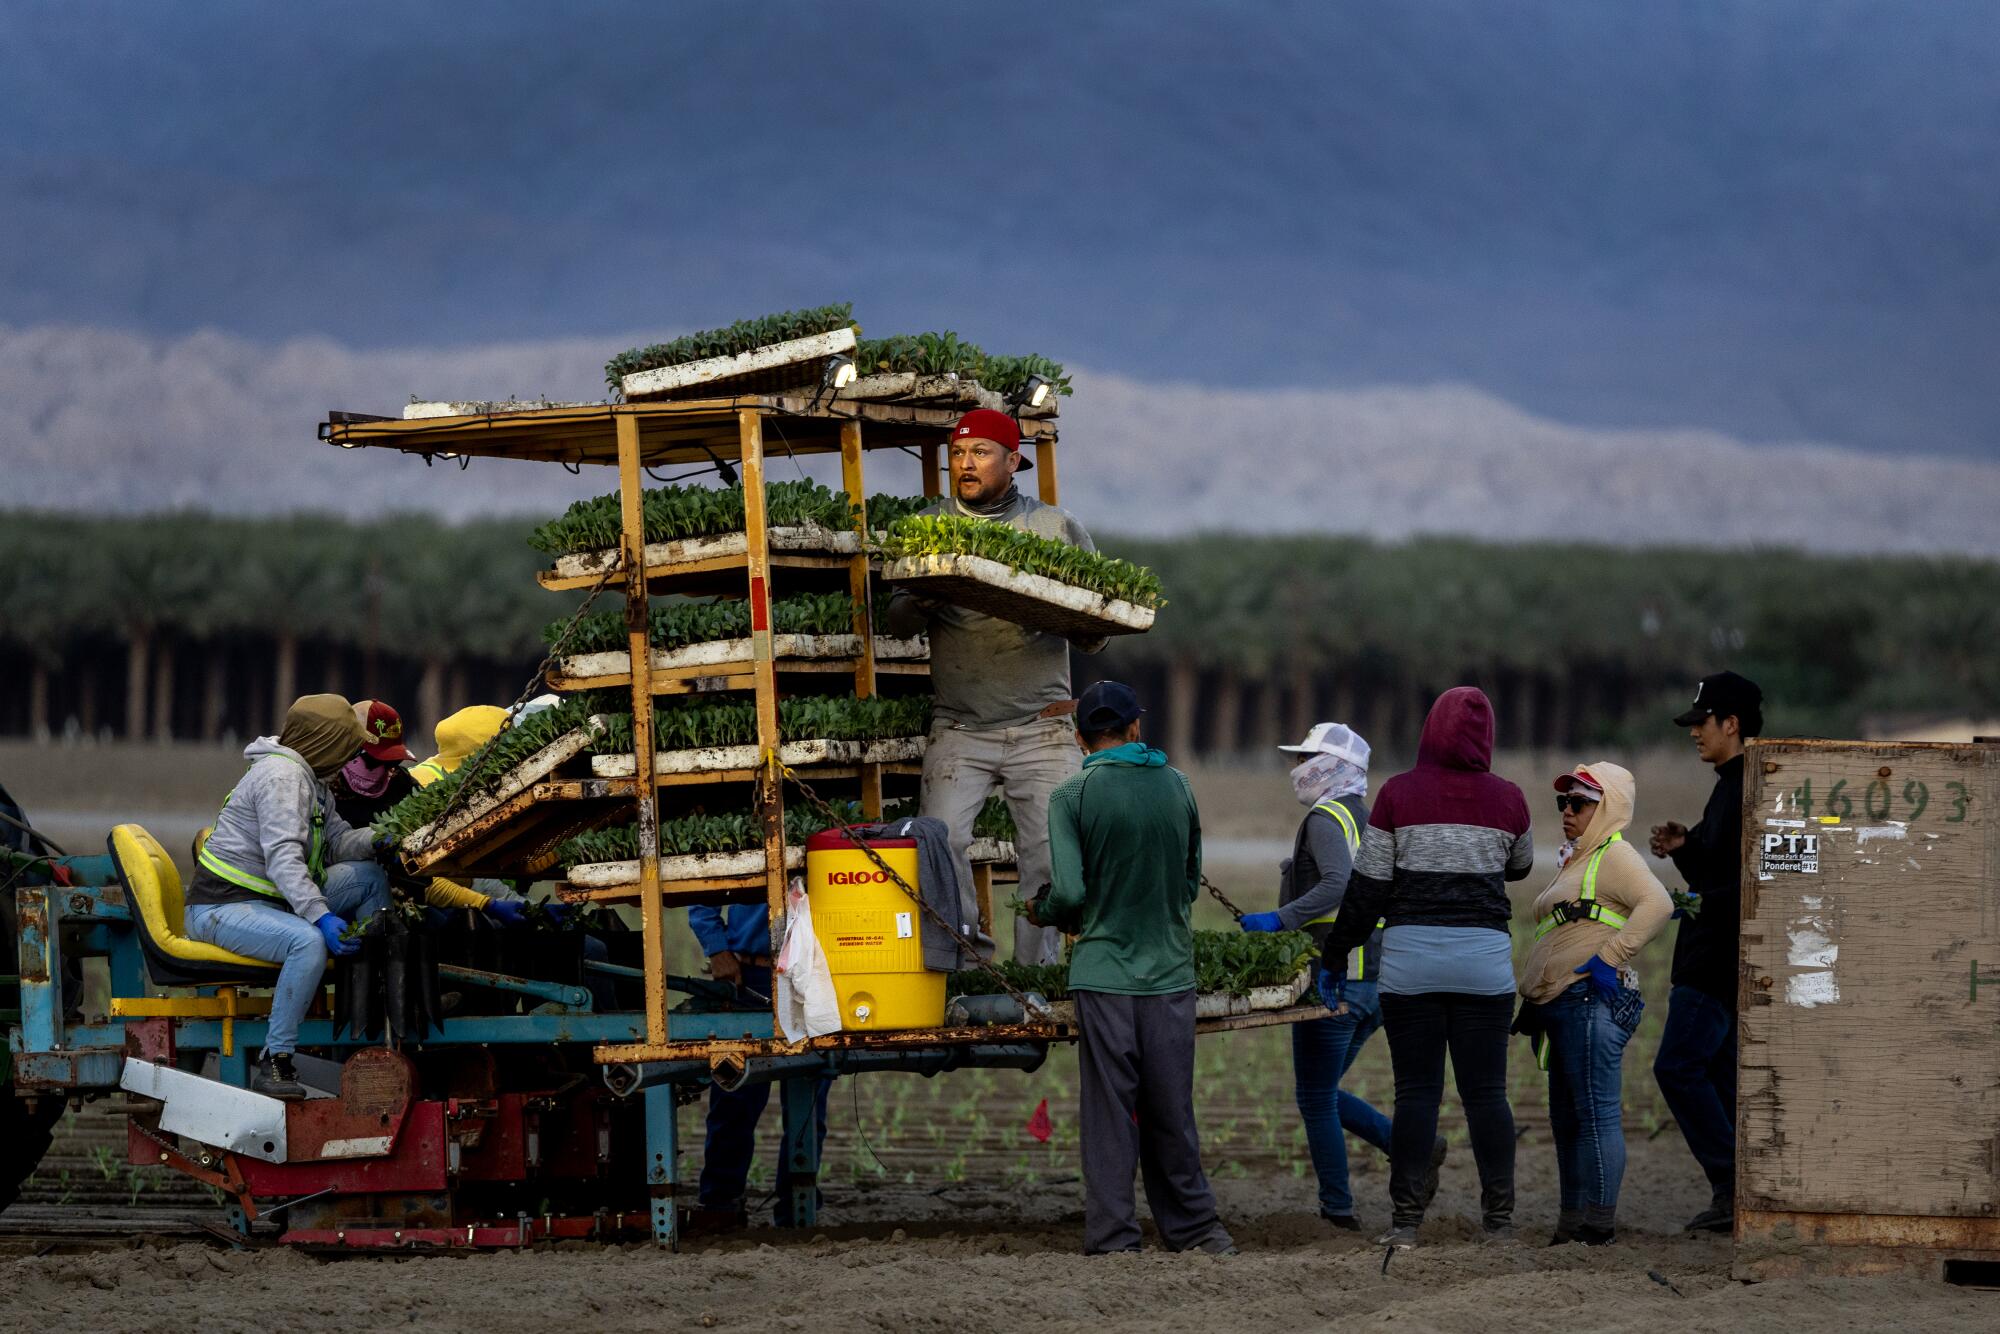 Farmworkers are planting winter vegetables, which should be harvested by the holidays.